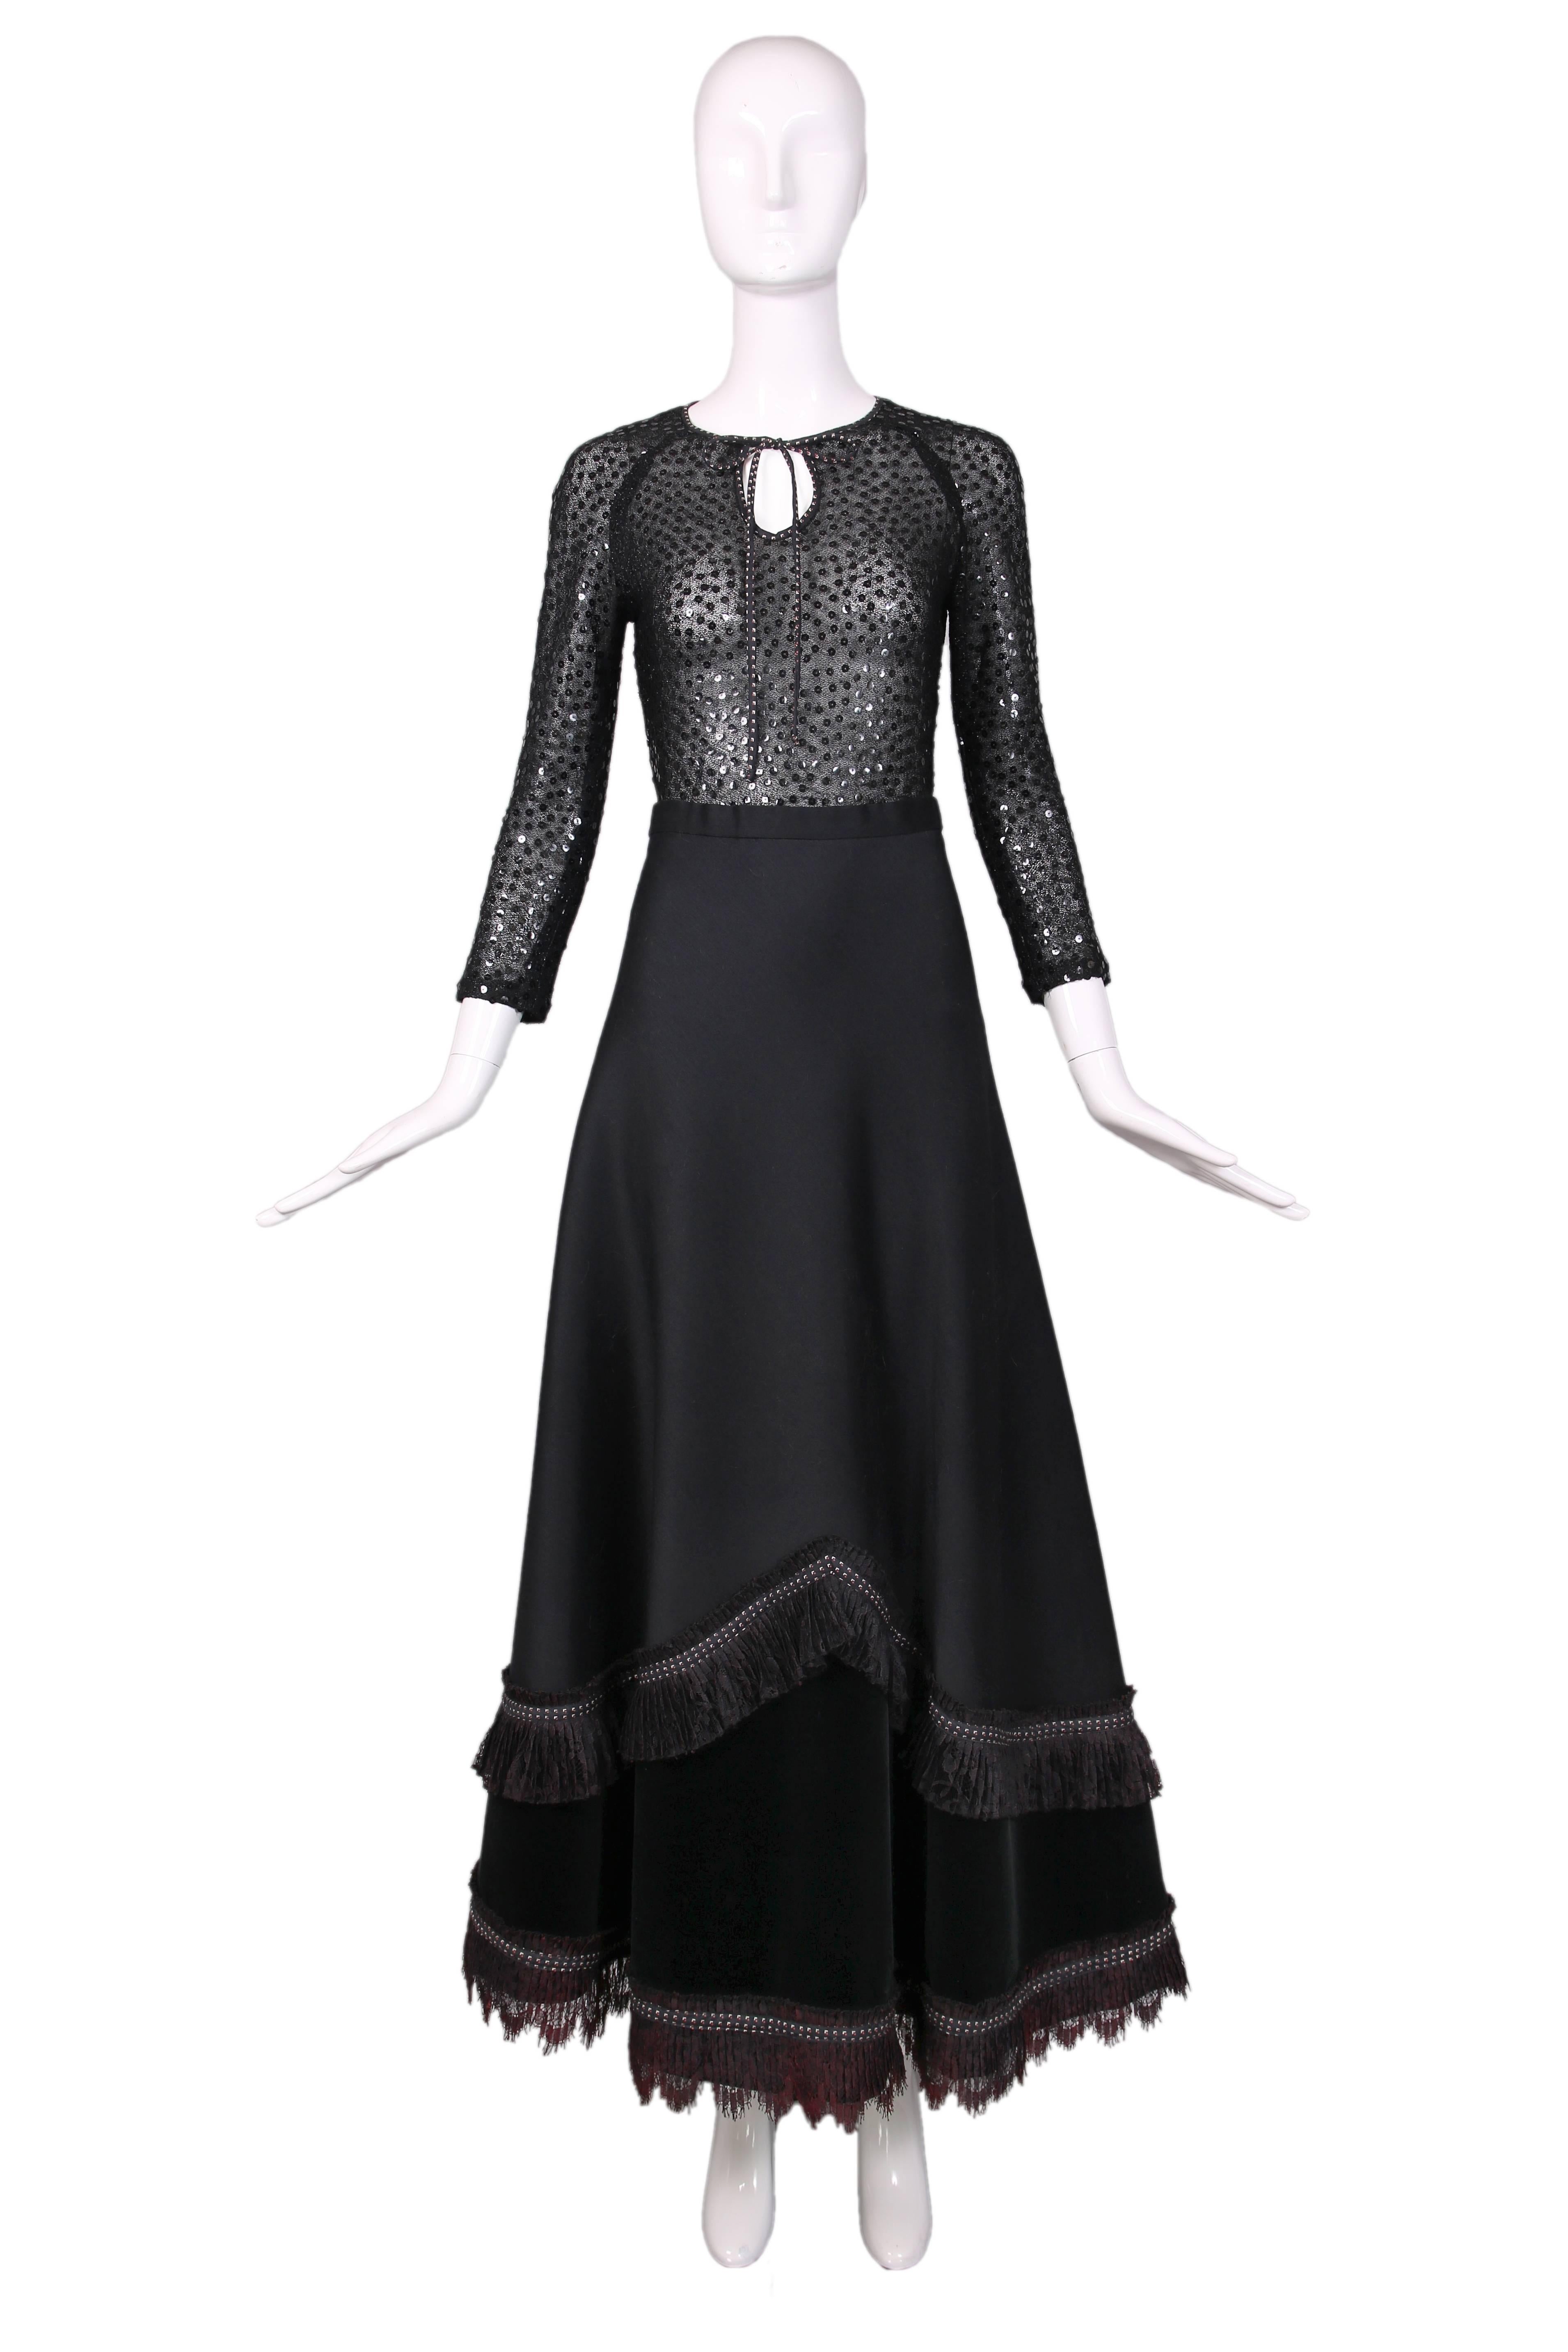 Koos Van Den Akker black sheer fitted sequin blouse with keyhole formed by neck ties and maxi skirt with lace and velvet trim. Blouse has a raglan sleeve. In excellent condition. No size tag, please consult measurements. No label inside blouse, only